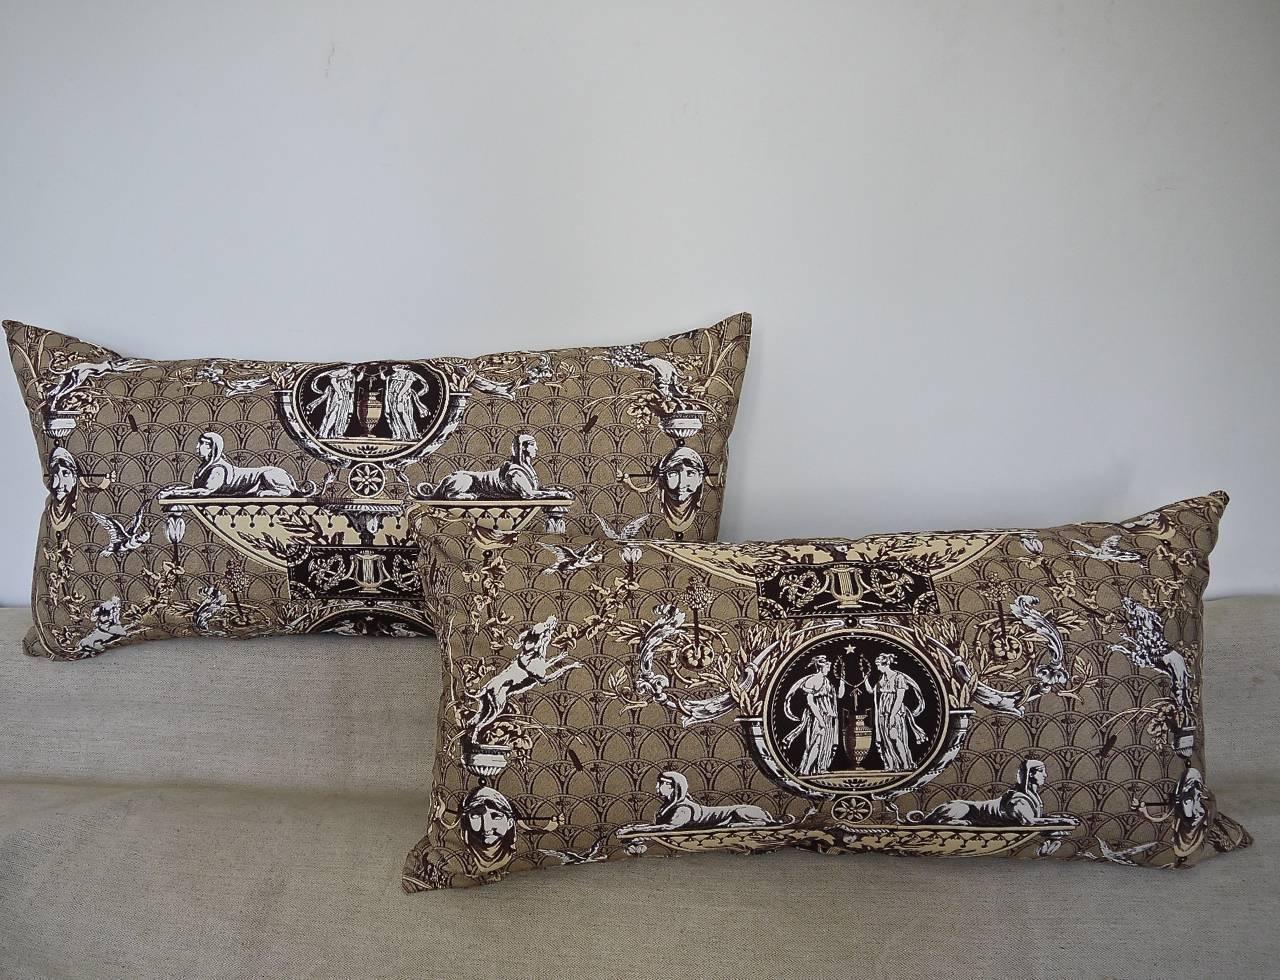 A pair of 1980s Brunschwig & Fils handprinted brown,cream and white toile cushions the design  called 'Les Sphinx Medaillons and are in a perfect unused condition.They are self-backed and slip-stitched closed with a duck feather insert.